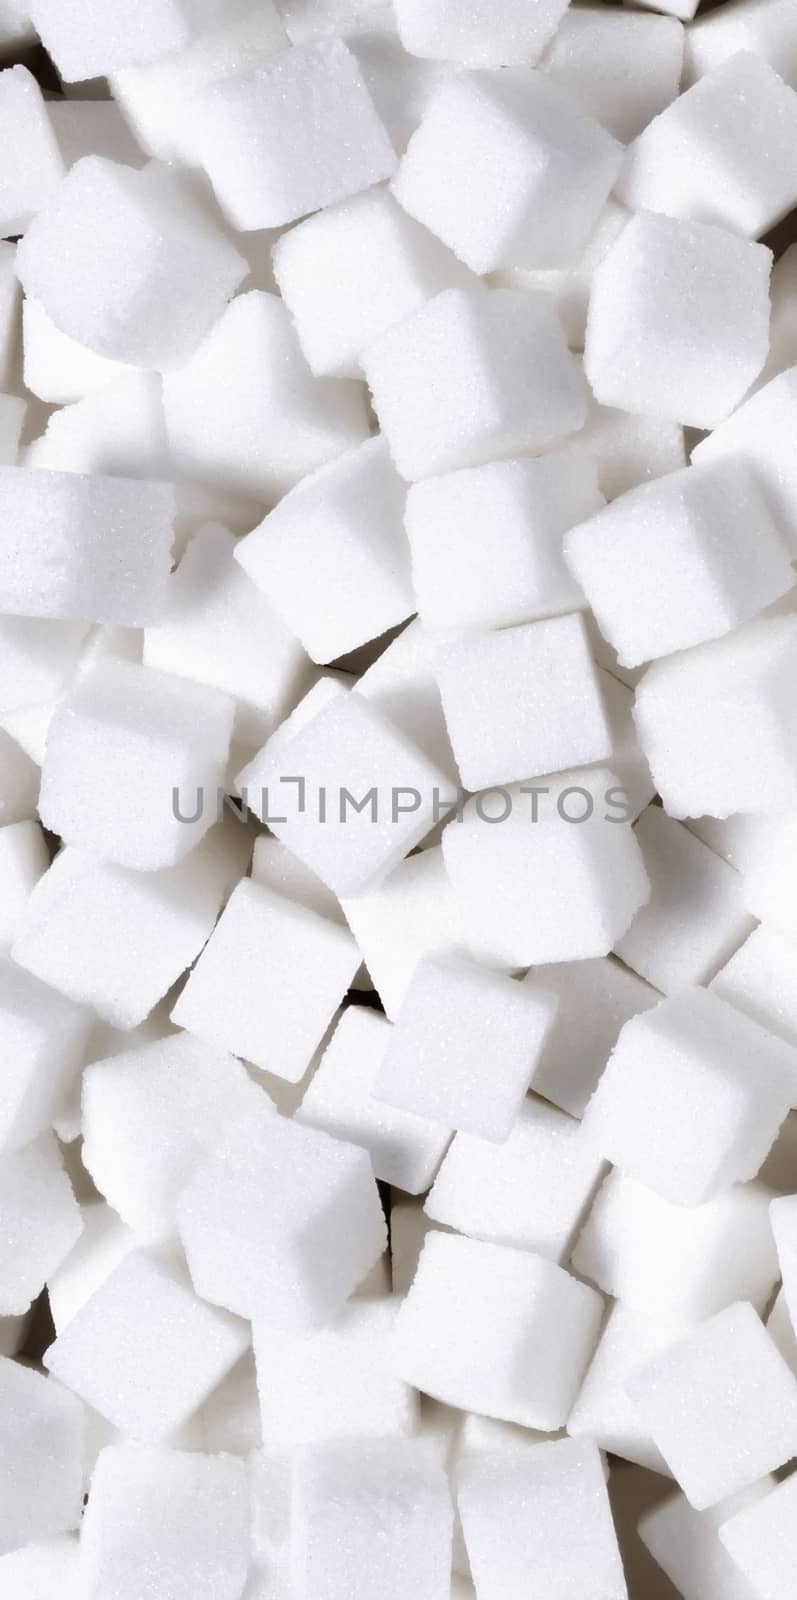 white sugar in cubes texture background by ozaiachin